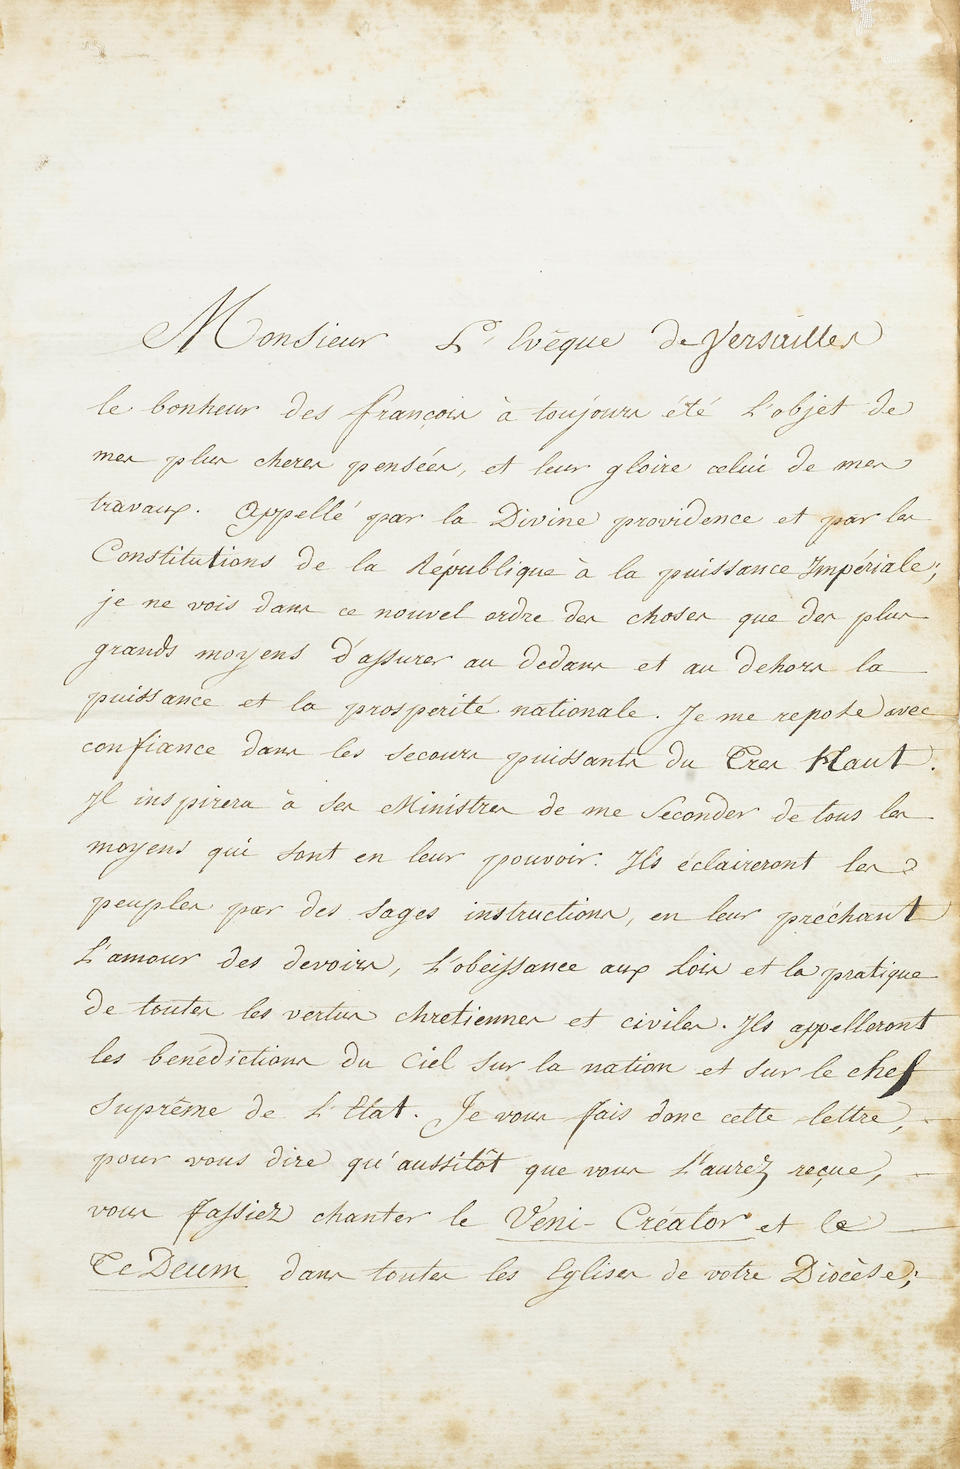 CORONATION OF 1804 NAPOLEON BONAPARTE. Letter signed ("Napoleon"), to the Bishop of Versailles regarding his impending coronation as Emperor, St. Cloud, 1st Prairial, year 12 [20 May 1804]